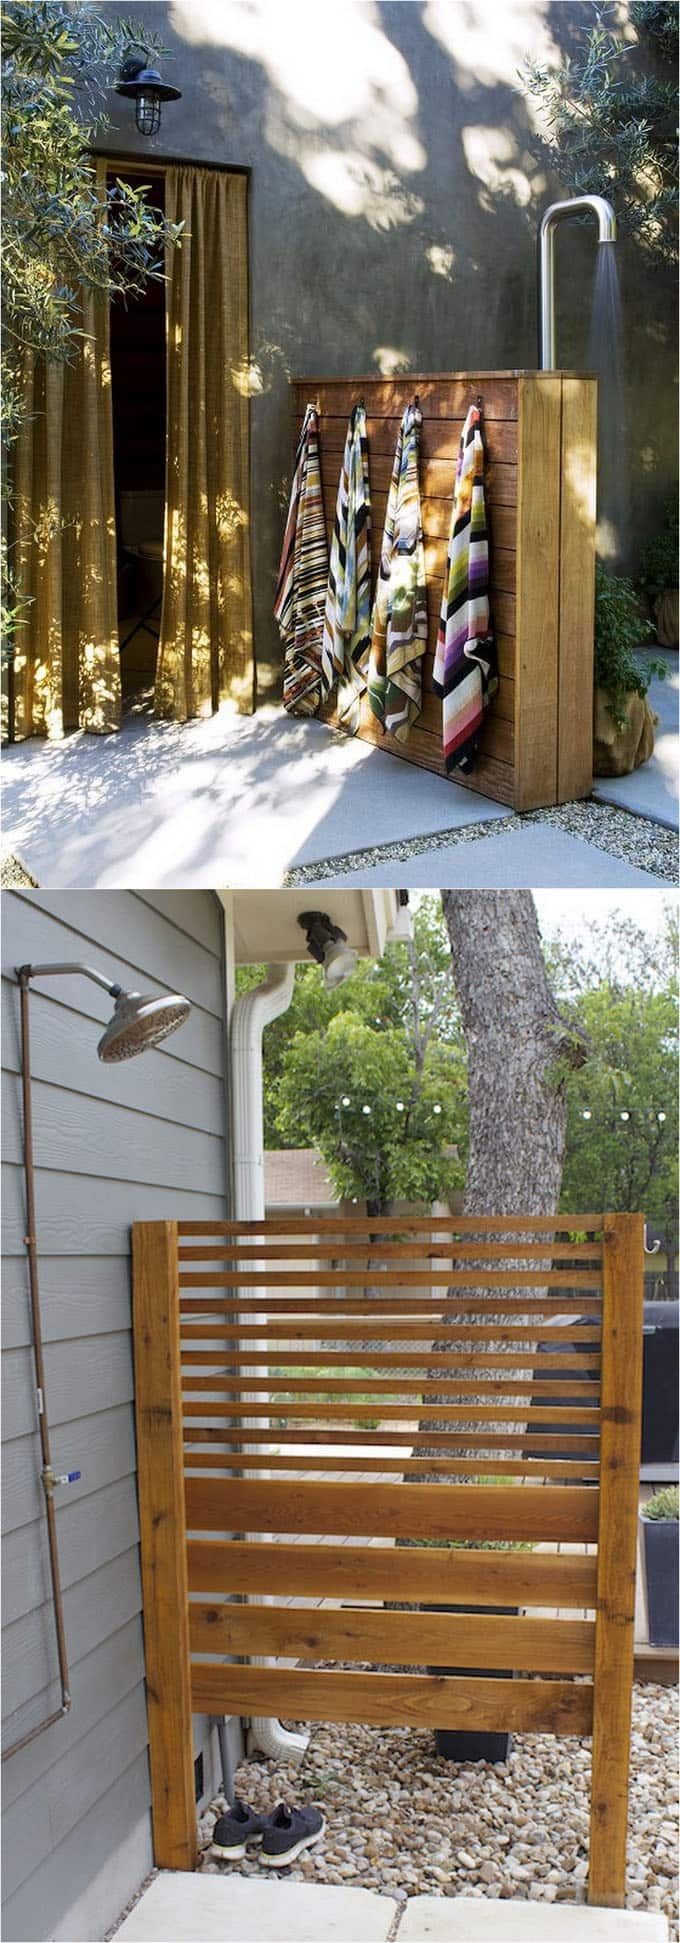 32 inspiring DIY outdoor showers lots of ideas on how to build enclosures with simple materials best outdoor shower fixtures creative designs and more